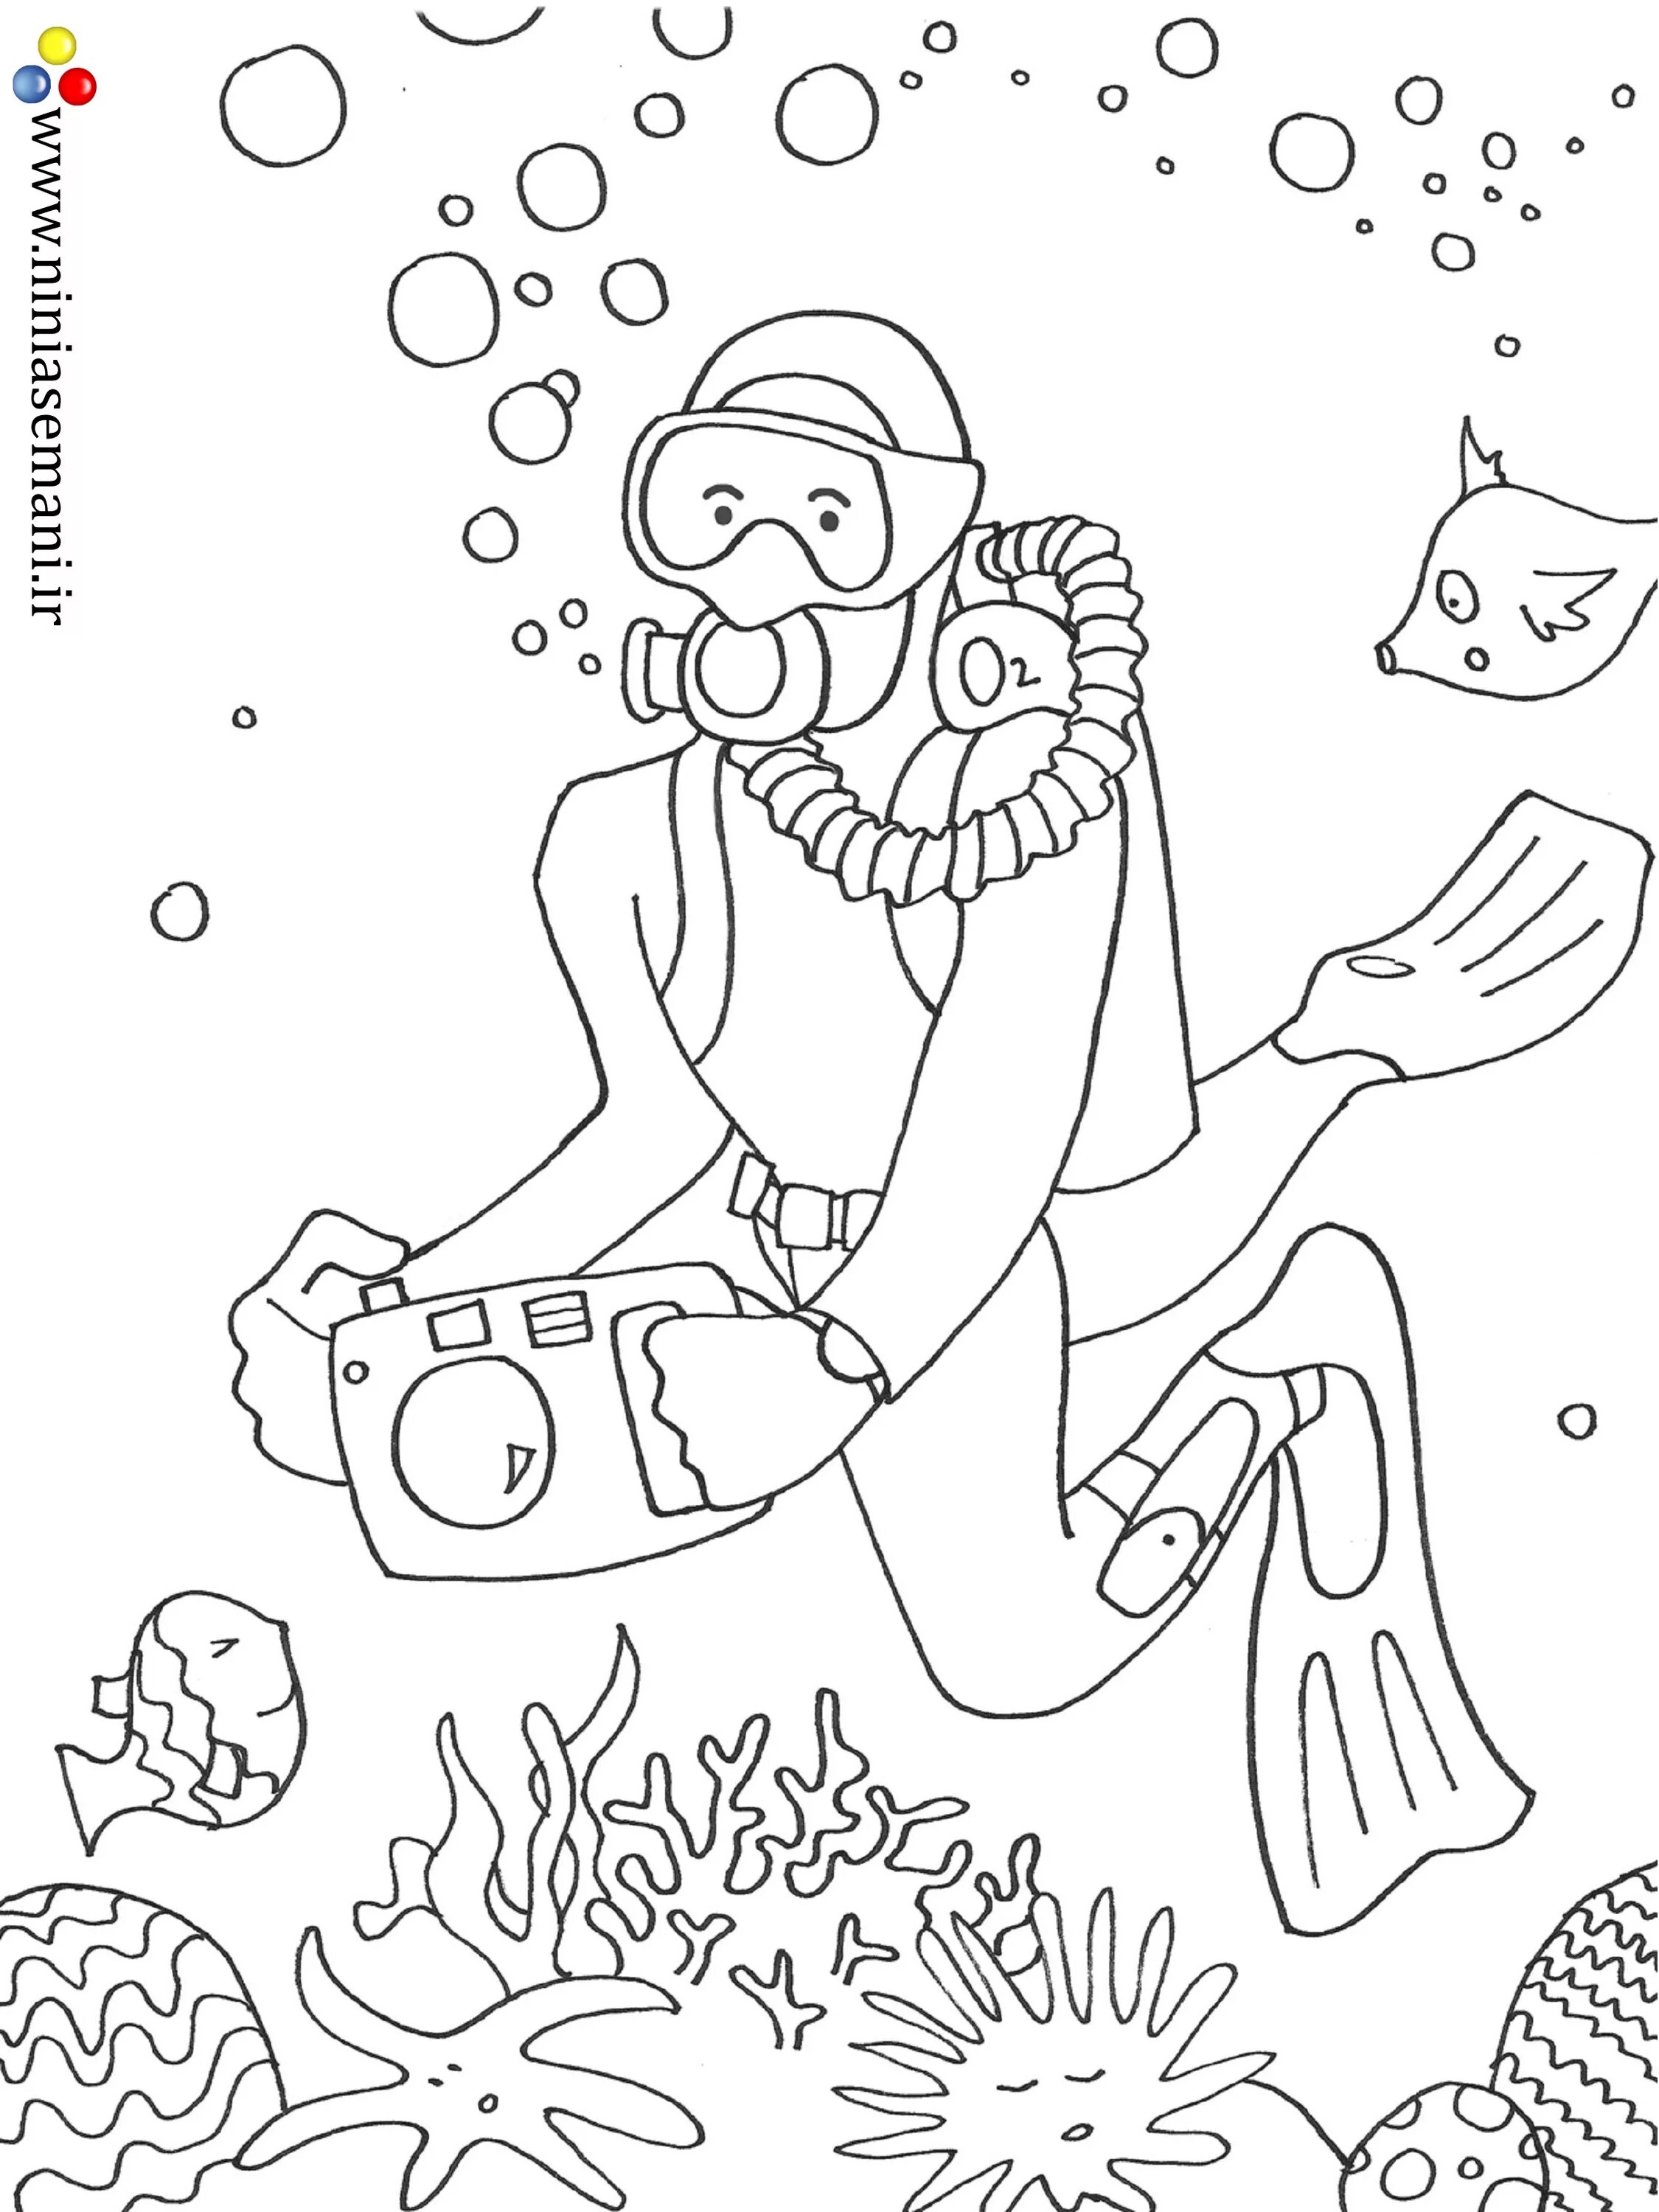 Coloring page of a fascinating scuba diver